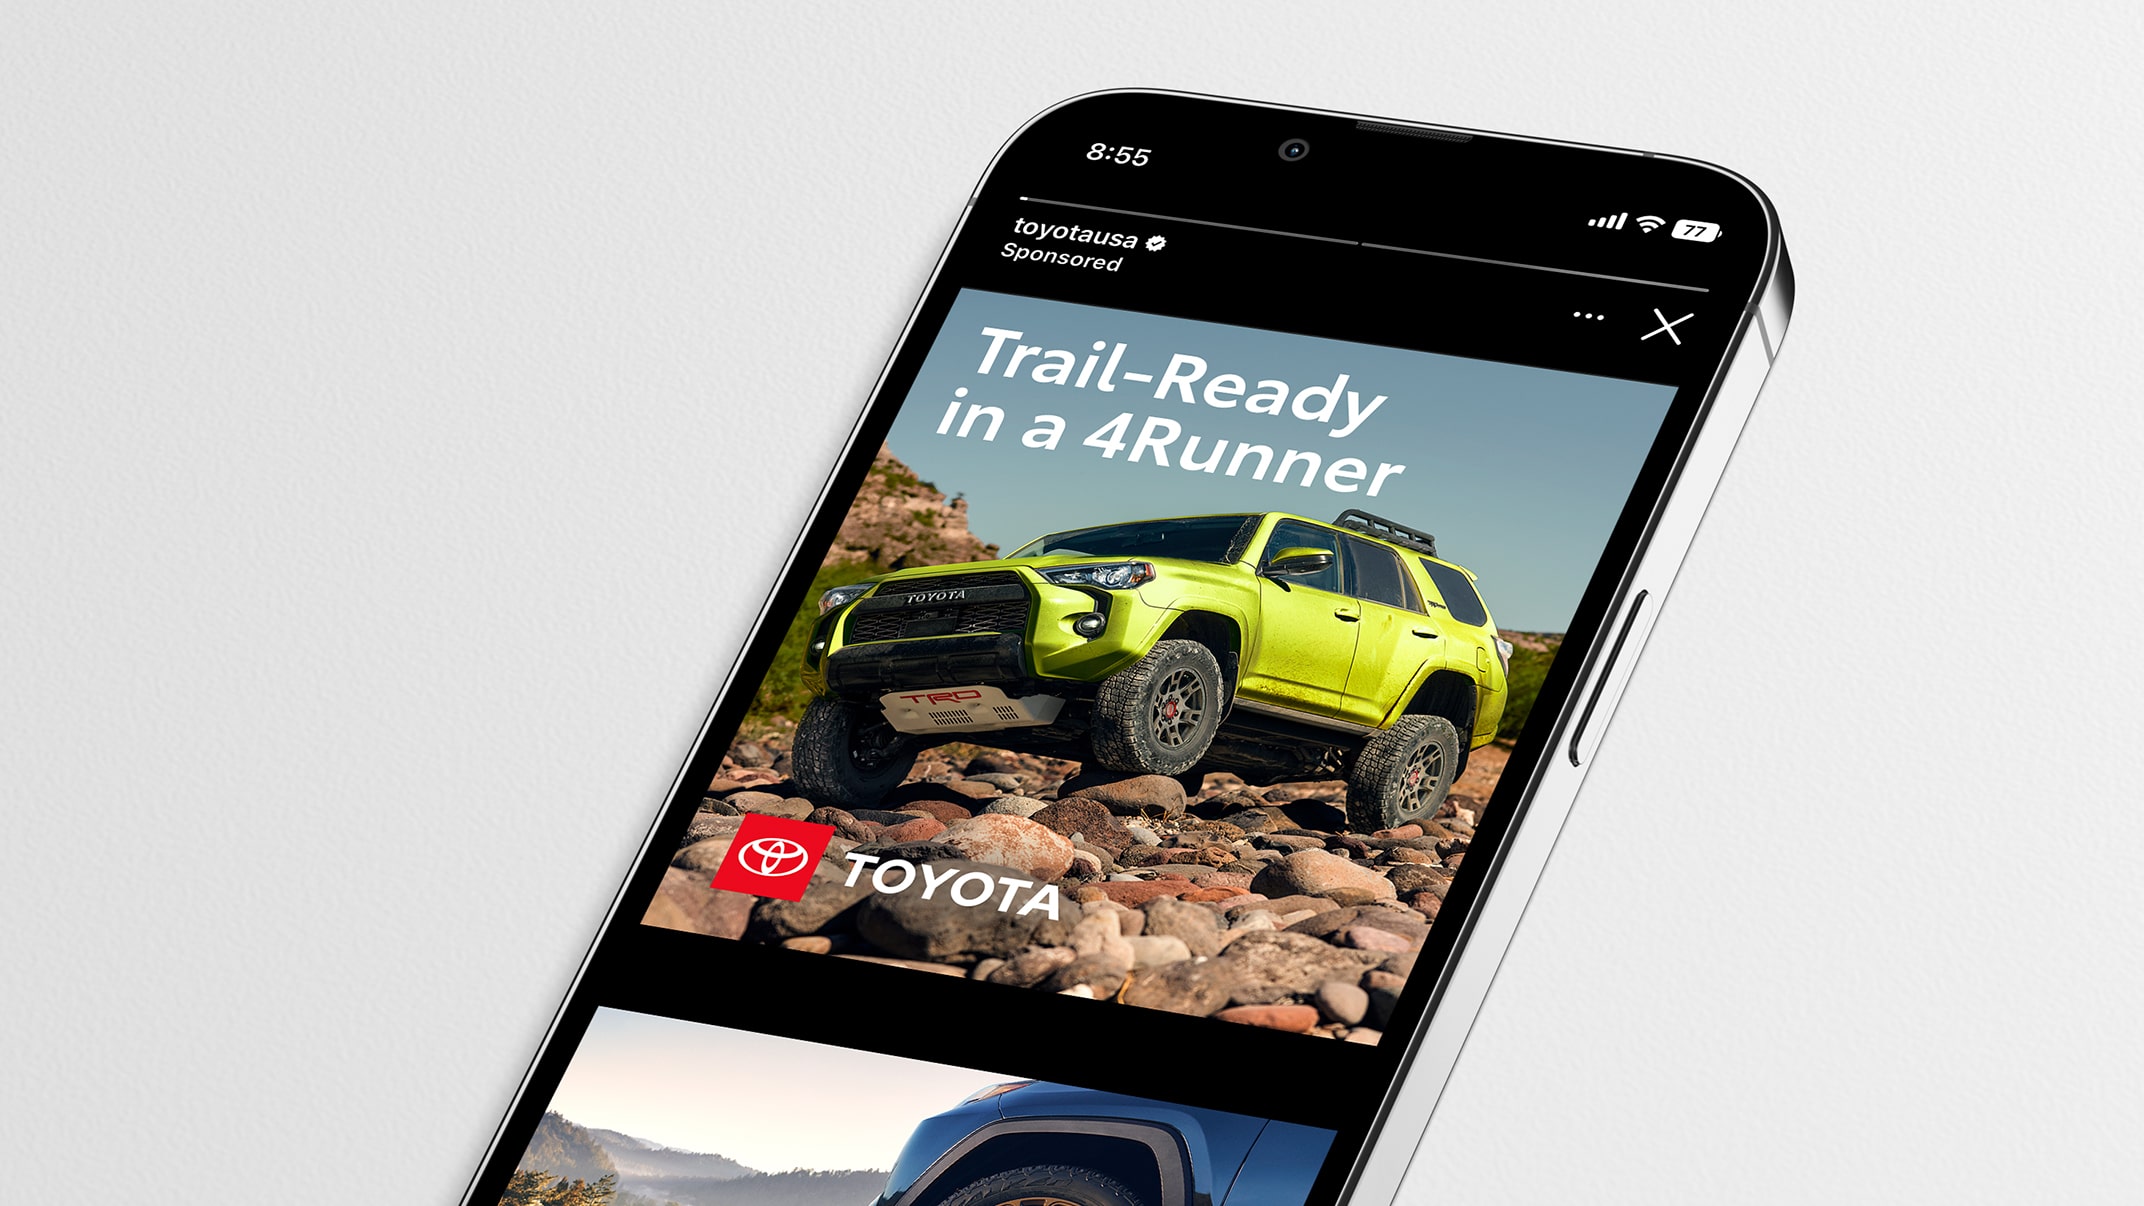 An iPhone screen shows a social media ad with the Toyota logo and a headline reading “Trail-Ready in a 4Runner.”